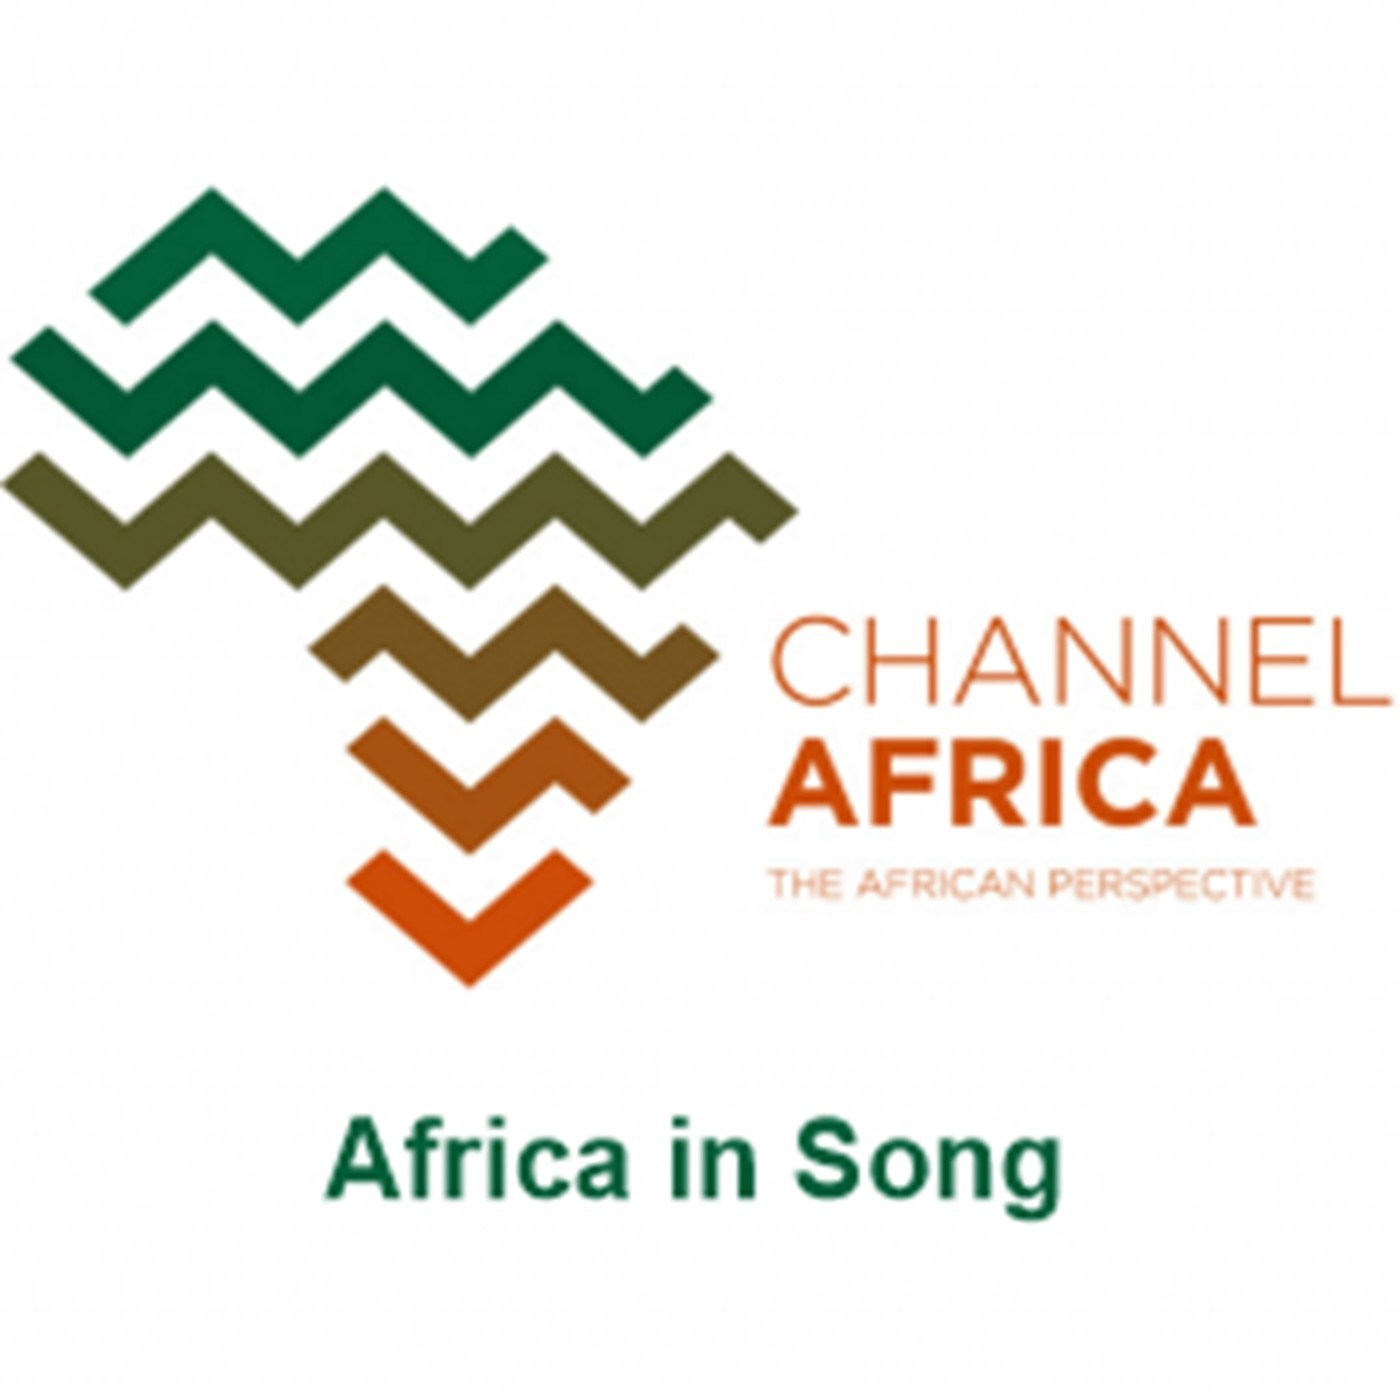 Africa in song